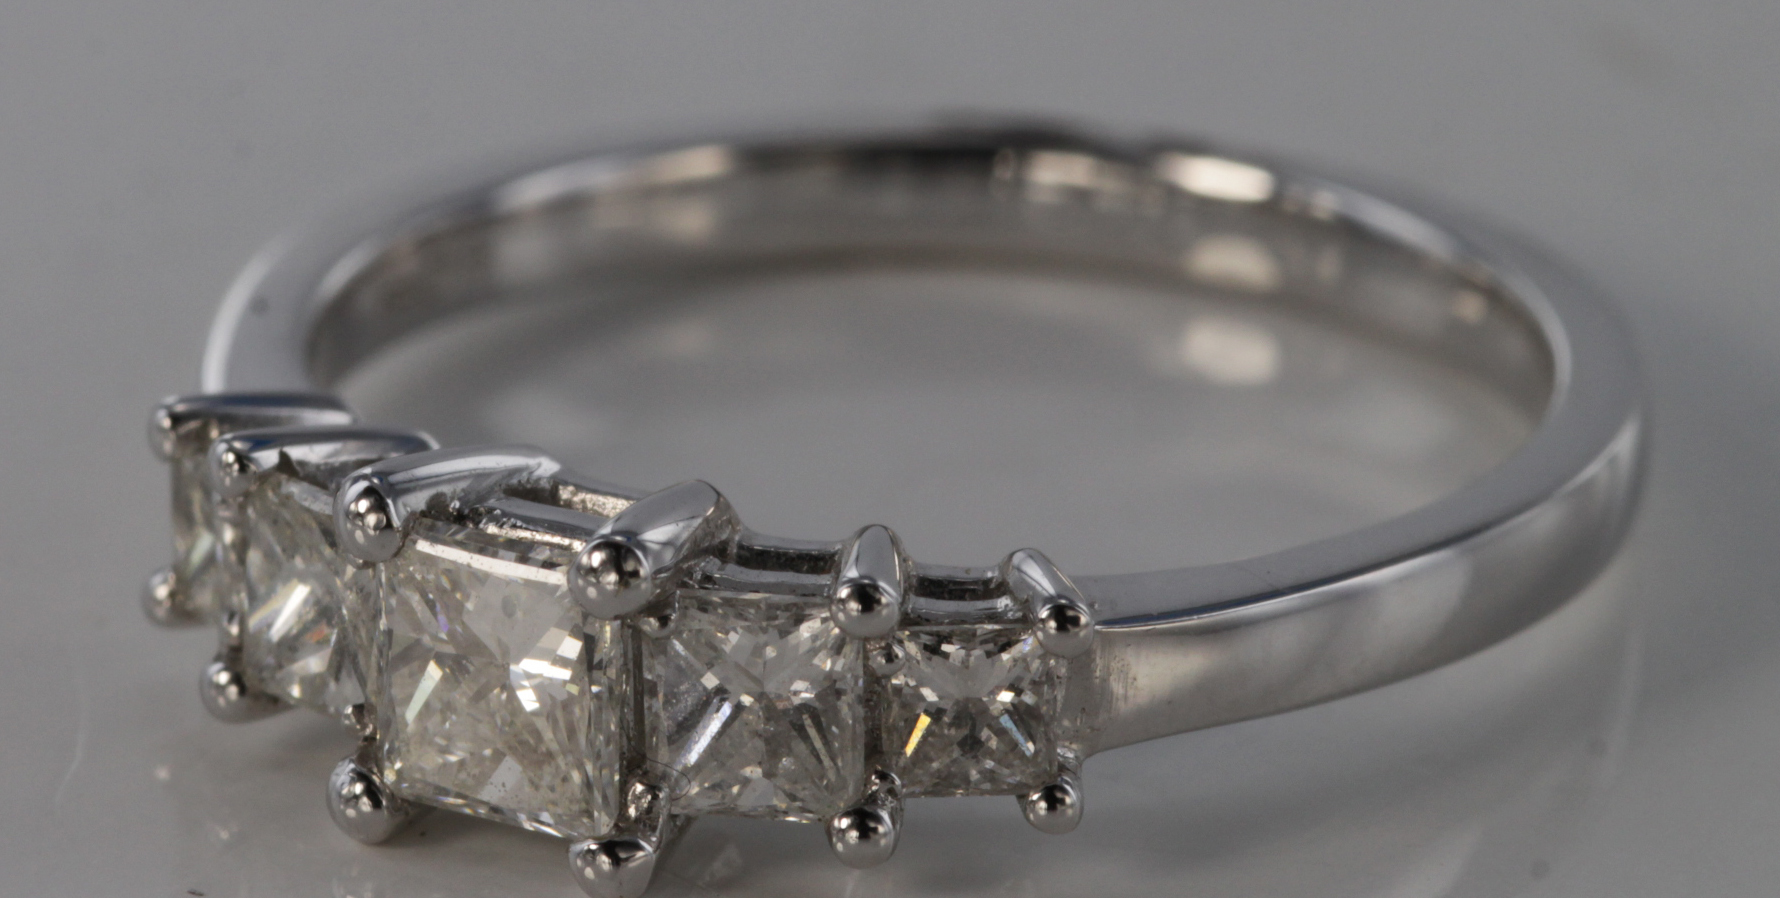 18ct white gold princess cut five stone ring, total diamond weight 0.82ct, size N, weight 2.6g.